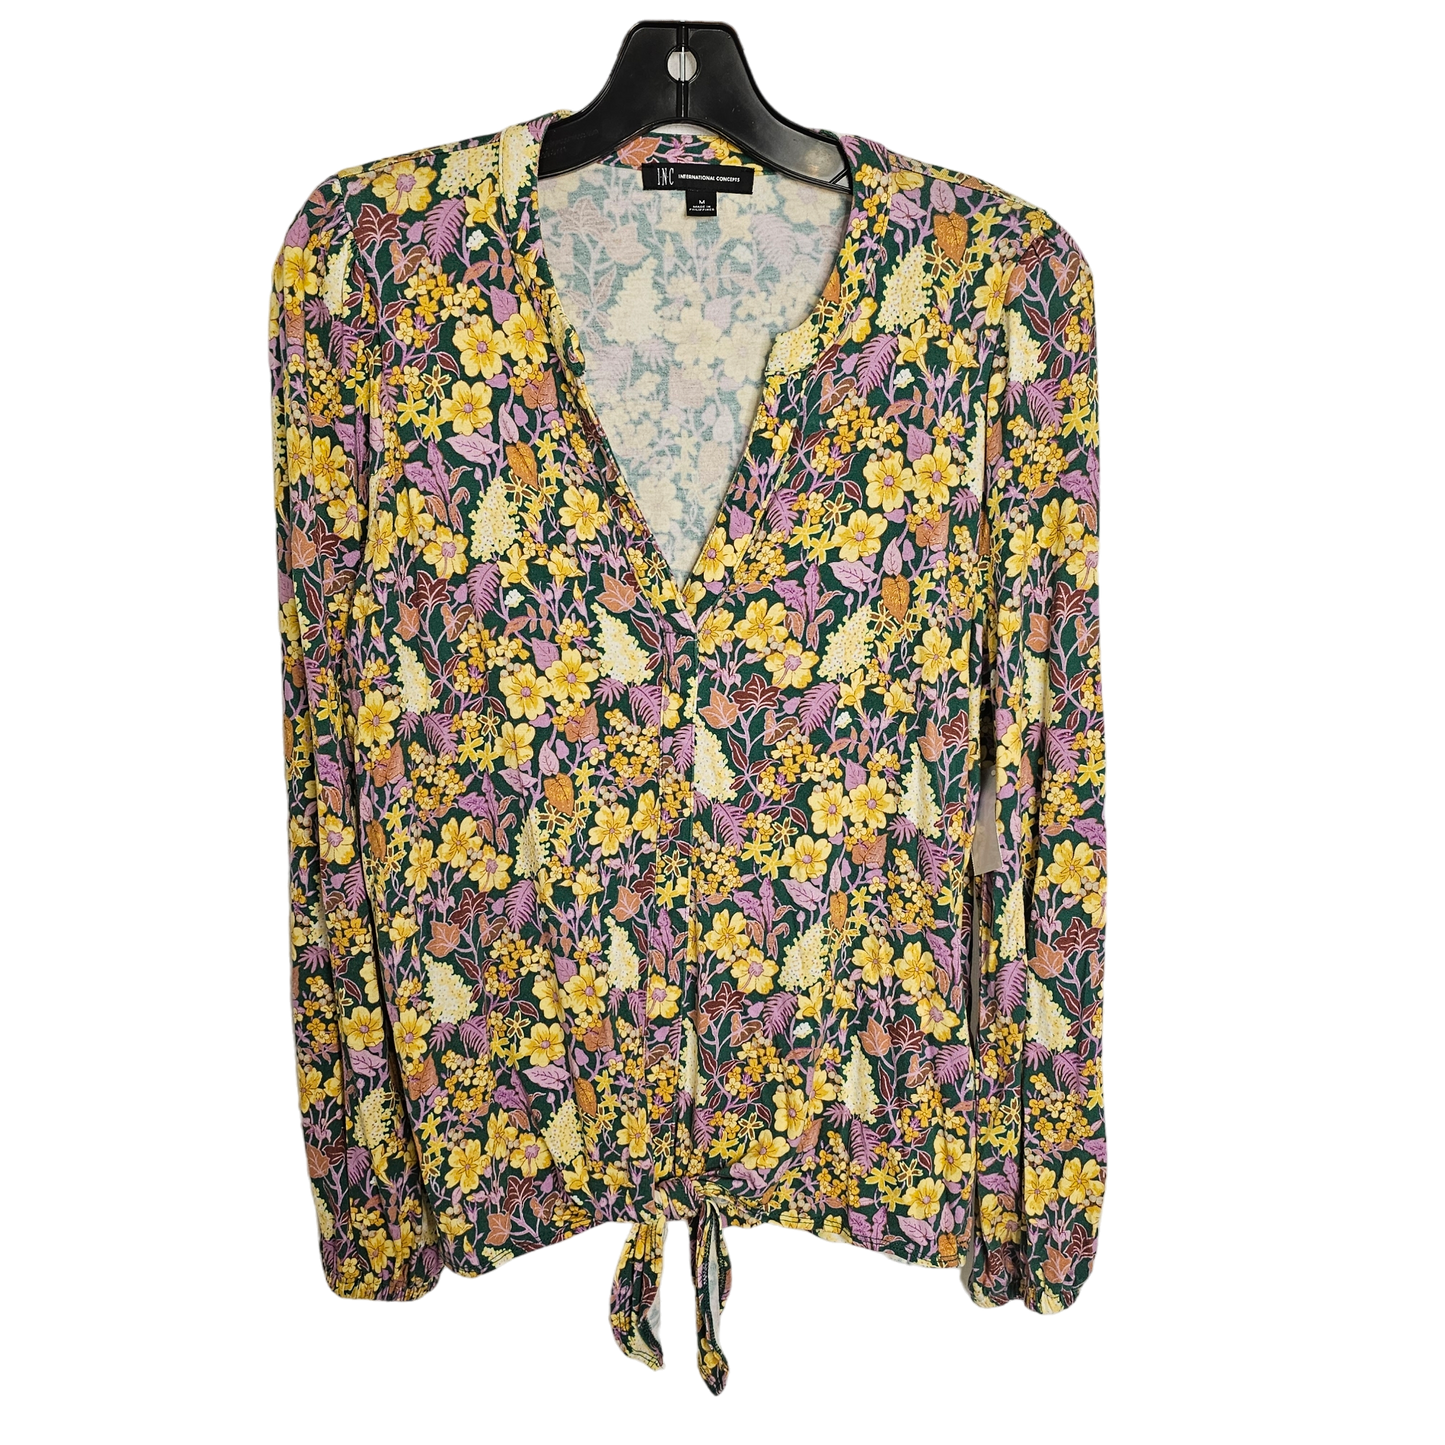 Floral Print Top Long Sleeve Inc, Size M